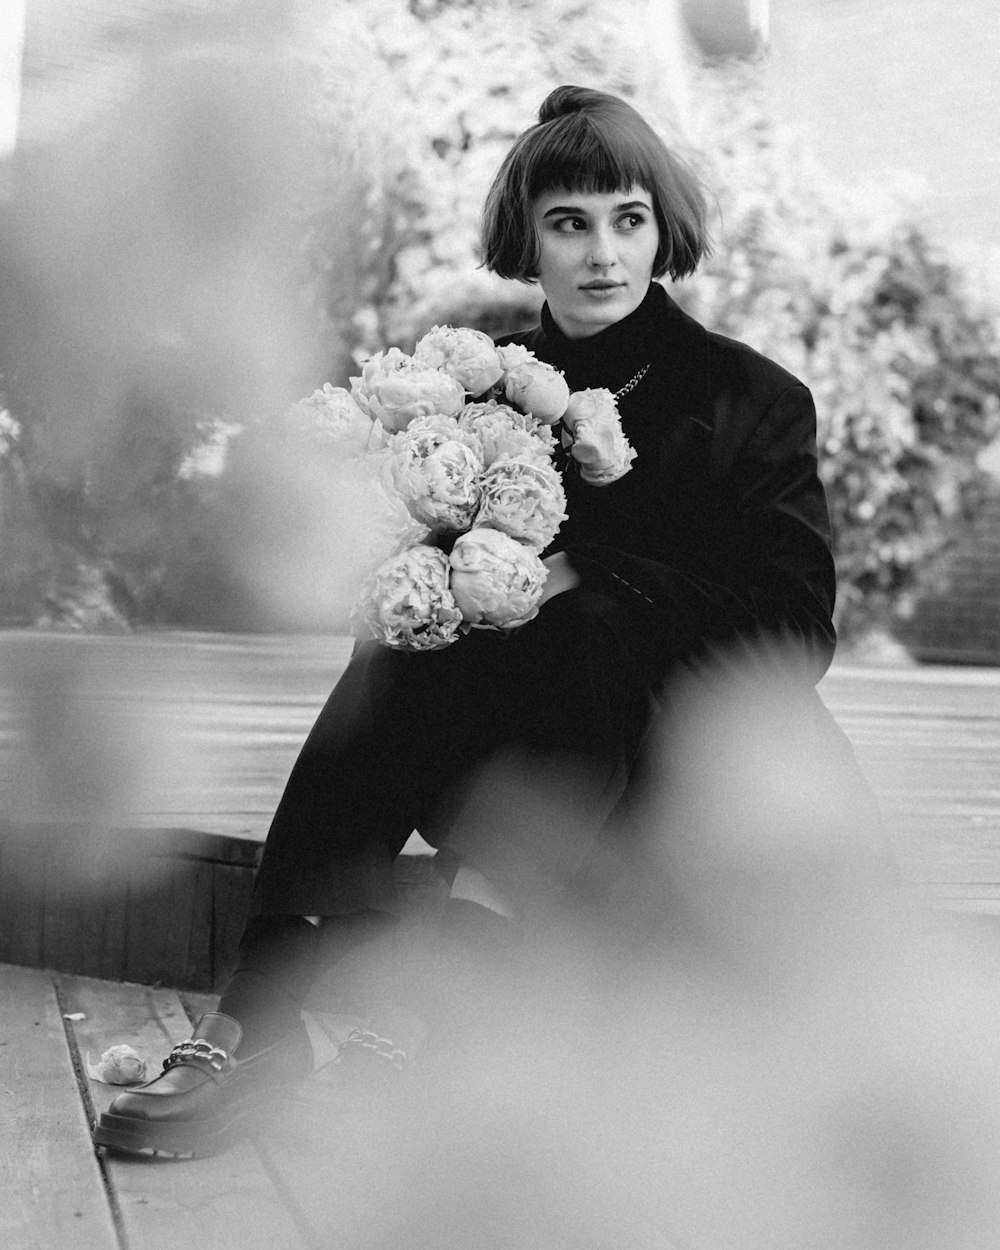 a person sitting on the ground holding flowers